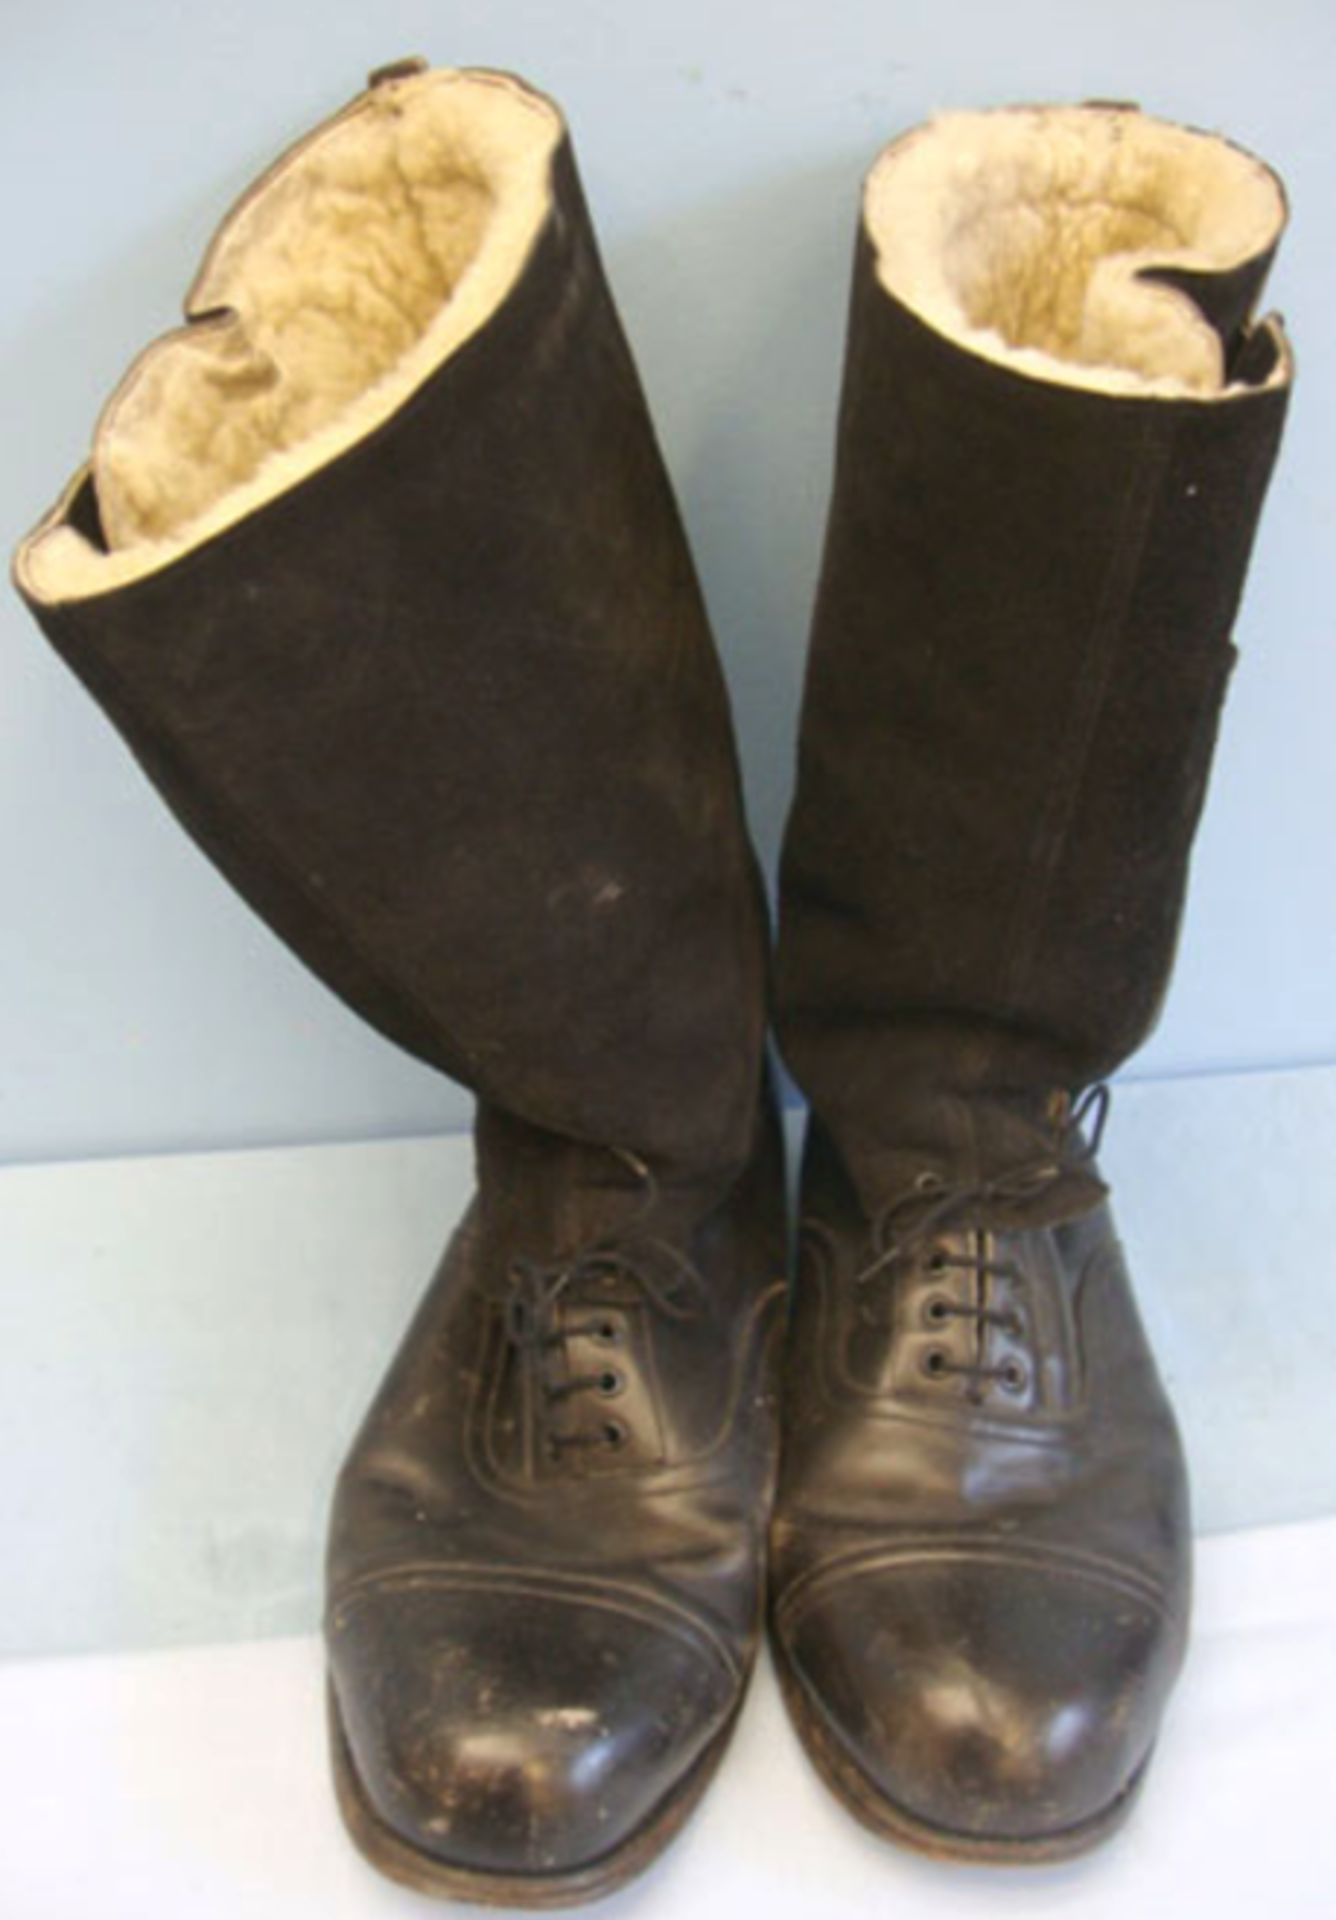 WW2 1943 Pattern Royal Air Force Pilot/Aircrew Fur Lined Escape Boots.   A pair of WW2 1943 Pattern,